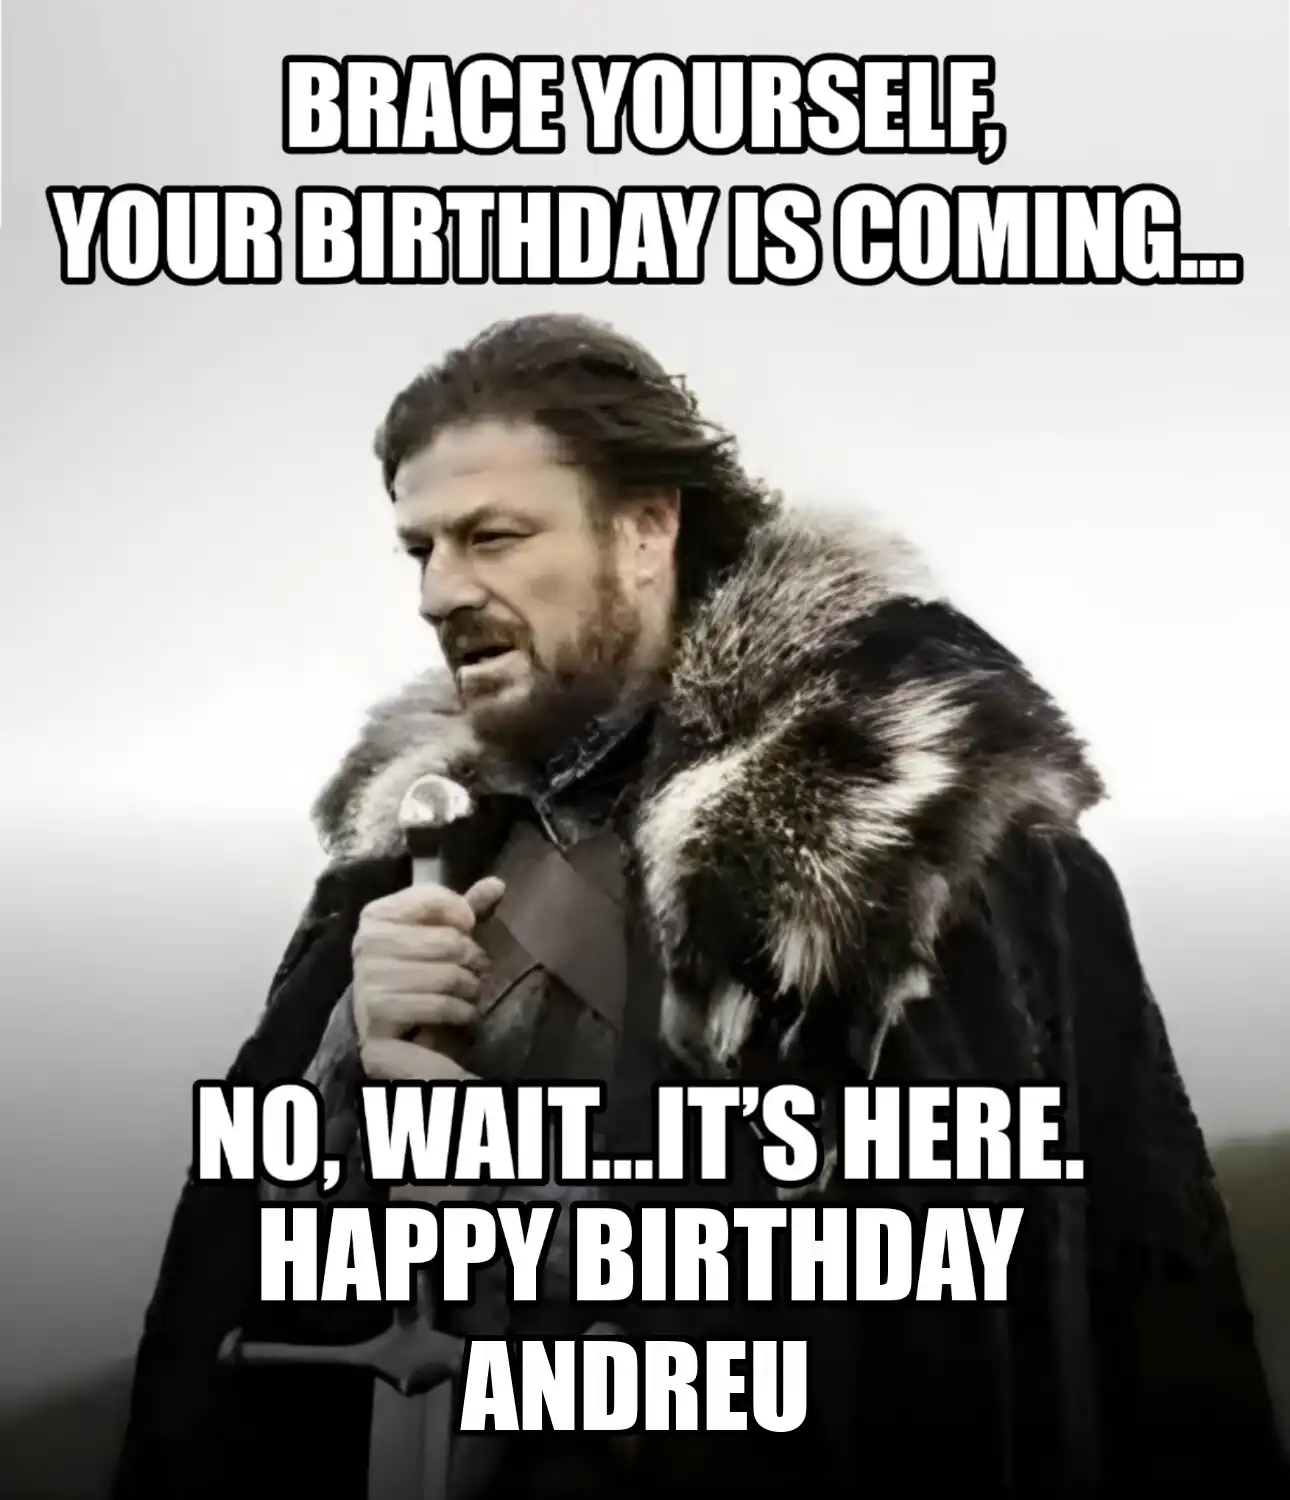 Happy Birthday Andreu Brace Yourself Your Birthday Is Coming Meme